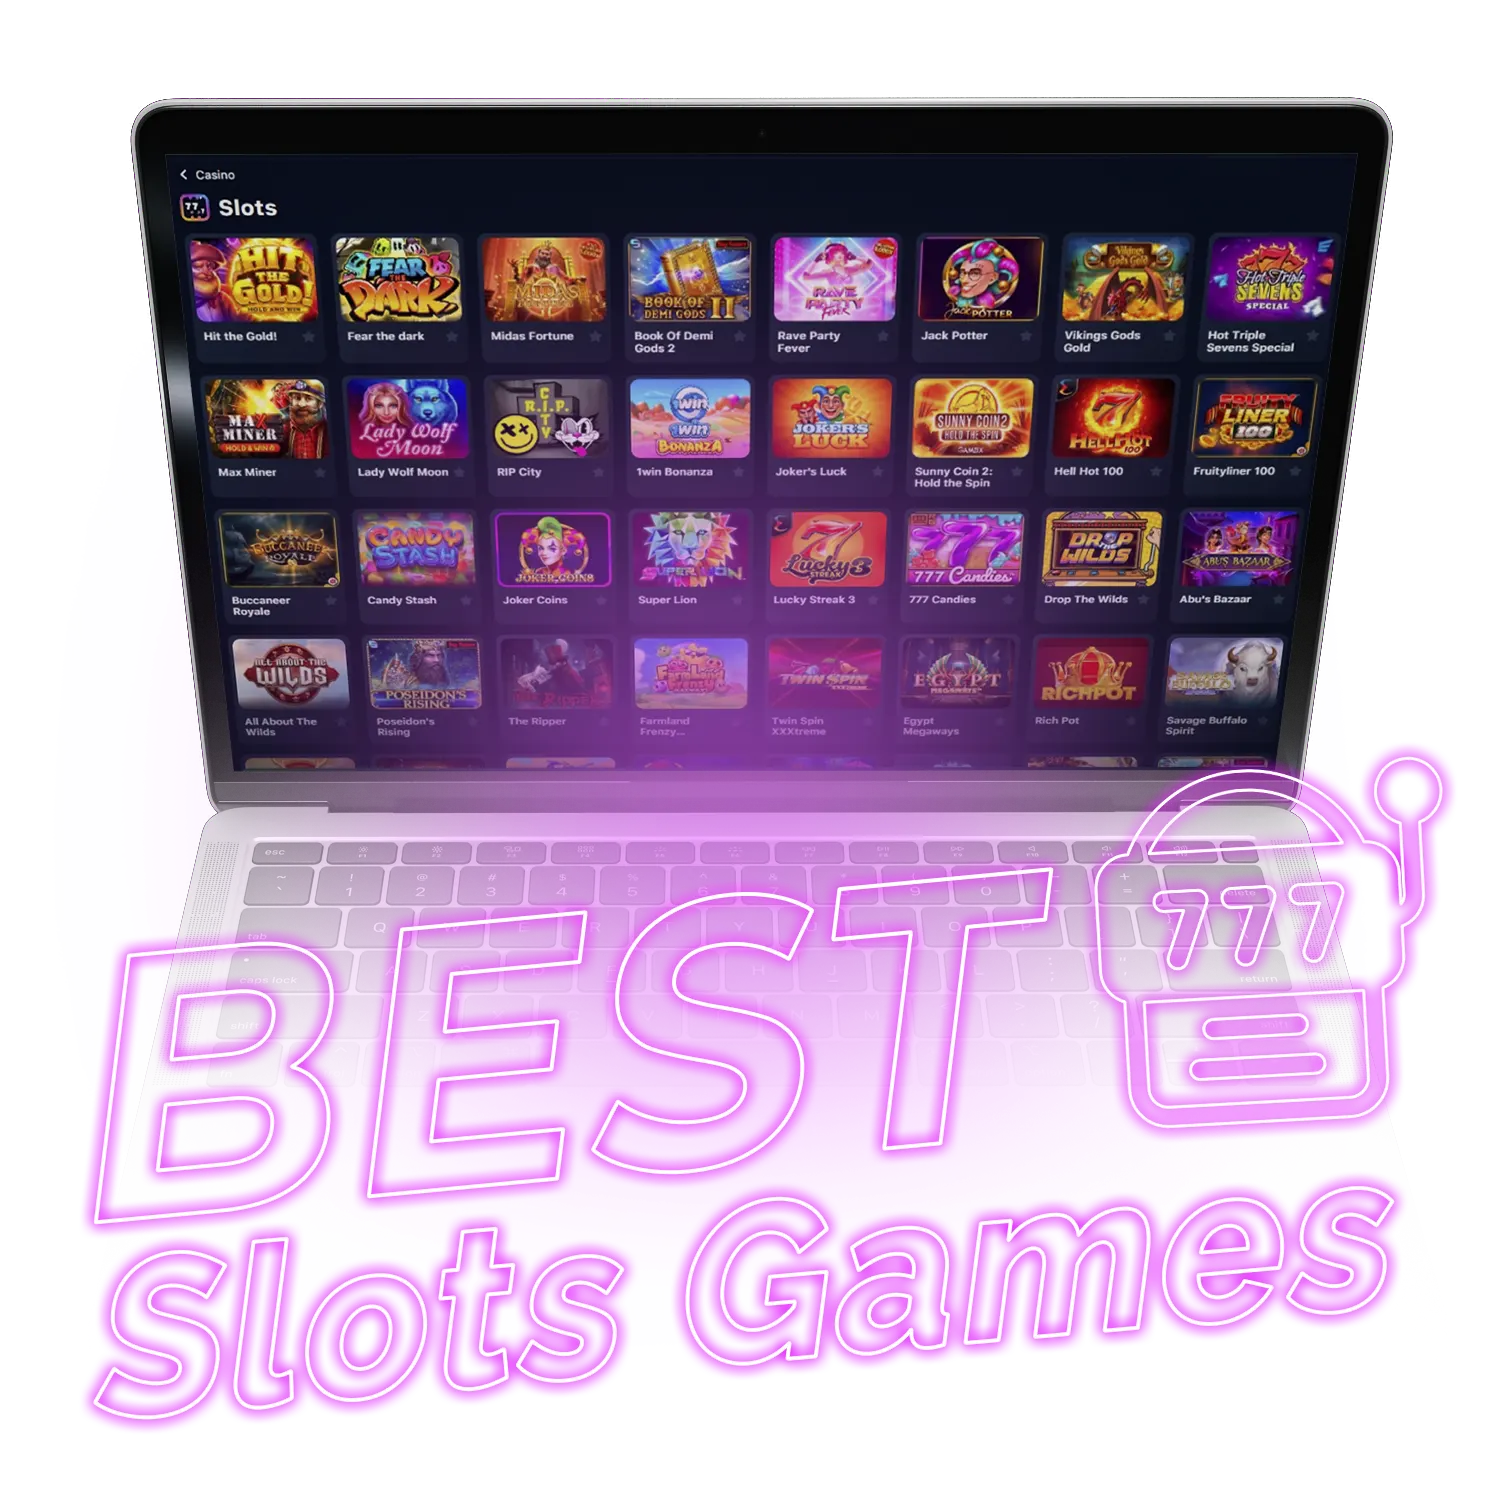 Learn more about the world of online slot games.